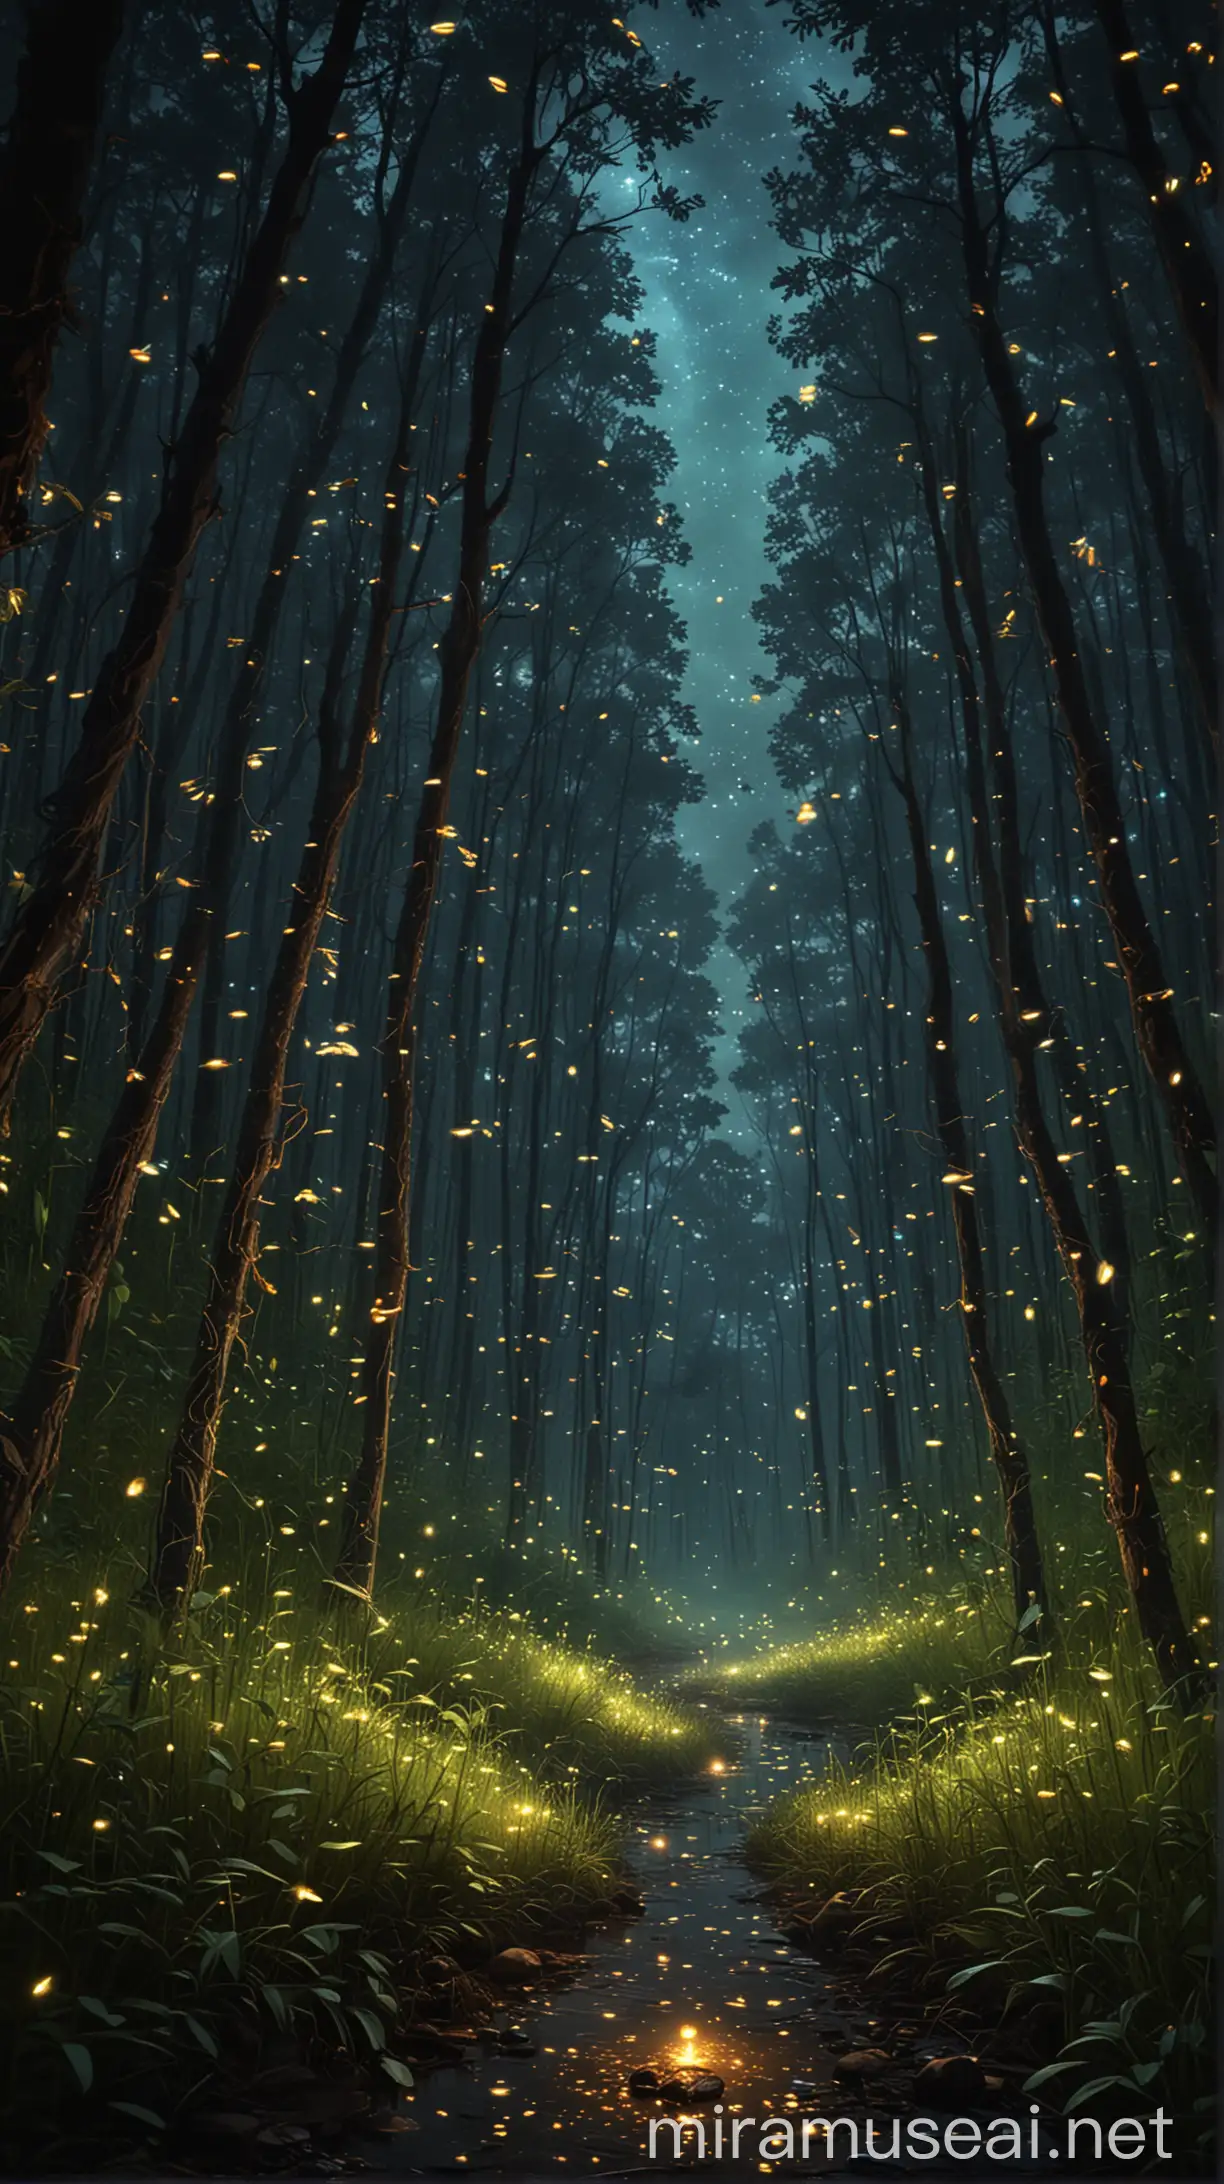 Night Forest Dream Illuminated by Fireflies